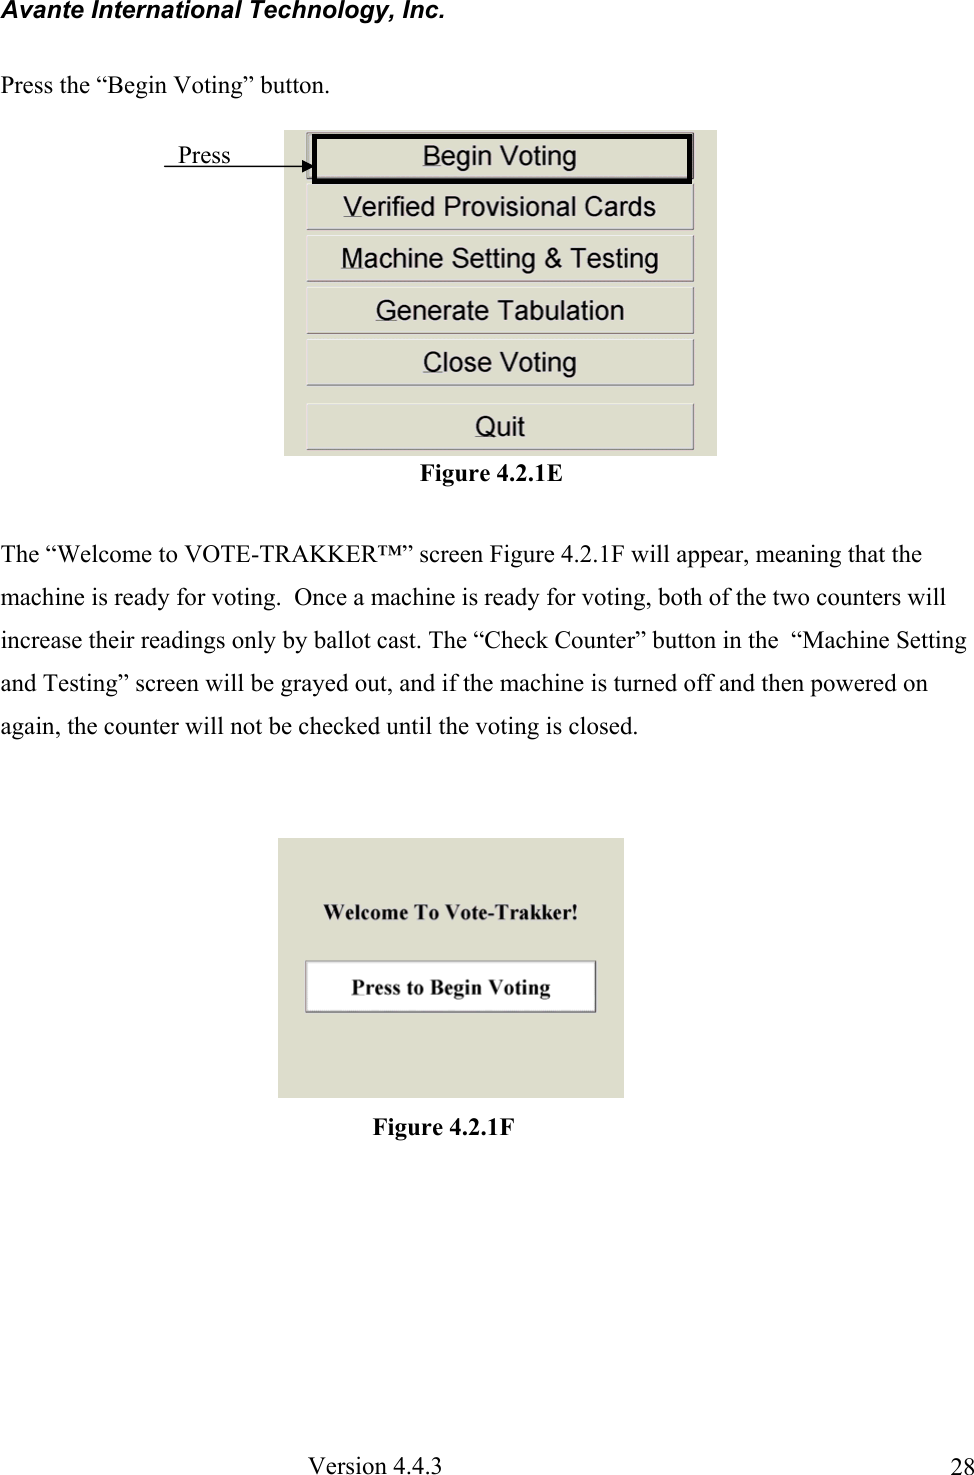 Avante International Technology, Inc.  Version 4.4.3  28Press the “Begin Voting” button.  The “Welcome to VOTE-TRAKKER™” screen Figure 4.2.1F will appear, meaning that the machine is ready for voting.  Once a machine is ready for voting, both of the two counters will increase their readings only by ballot cast. The “Check Counter” button in the  “Machine Setting and Testing” screen will be grayed out, and if the machine is turned off and then powered on again, the counter will not be checked until the voting is closed.                                                                     Figure 4.2.1F Press Figure 4.2.1E 